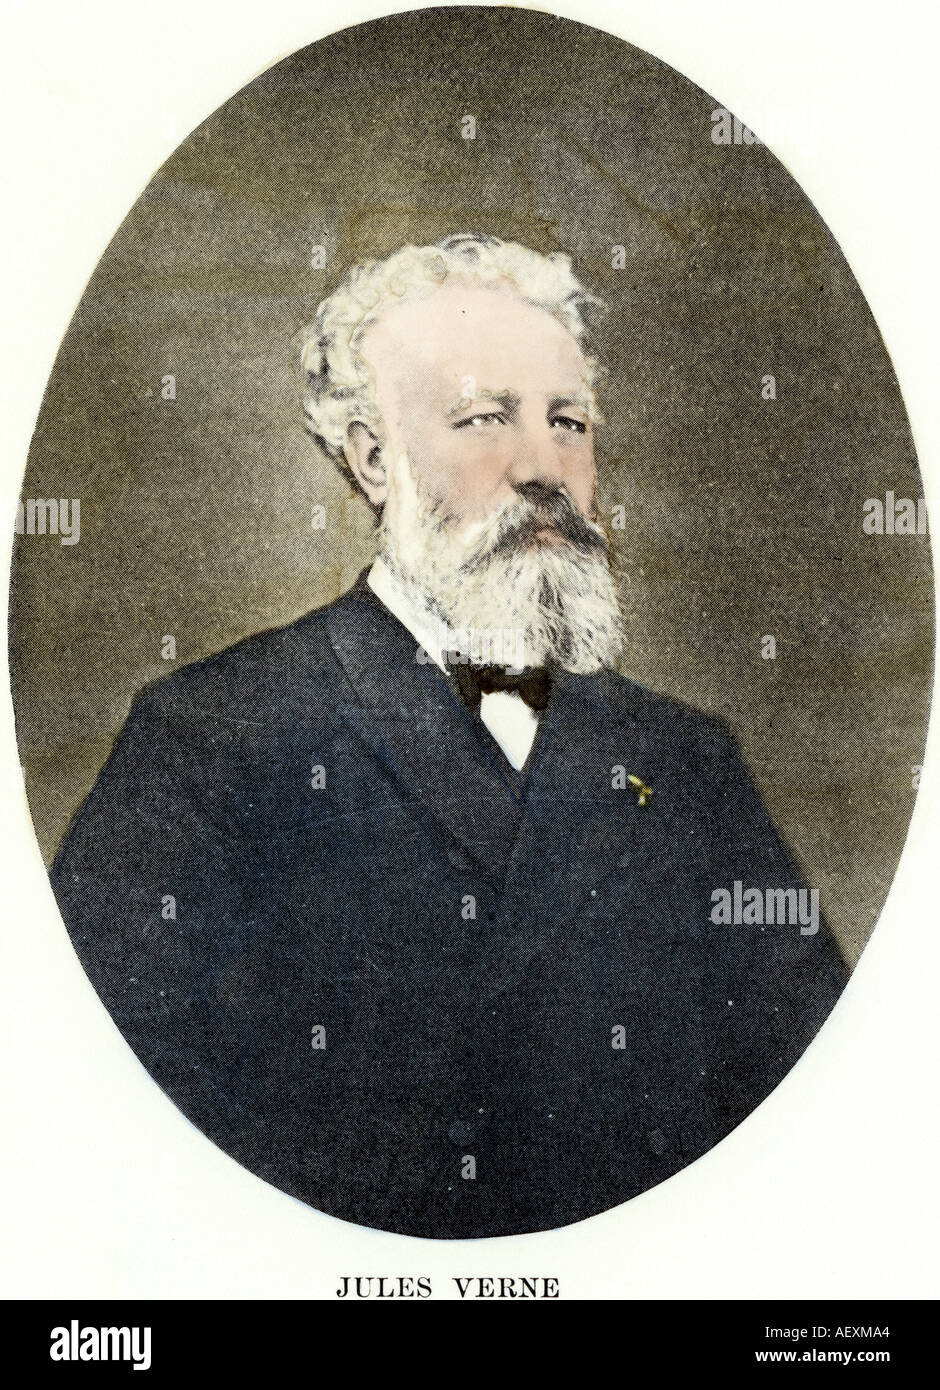 EP-000 JULES VERNE FRENCH NOVELIST POET PLAYWRIGHT 8X10 PHOTO 